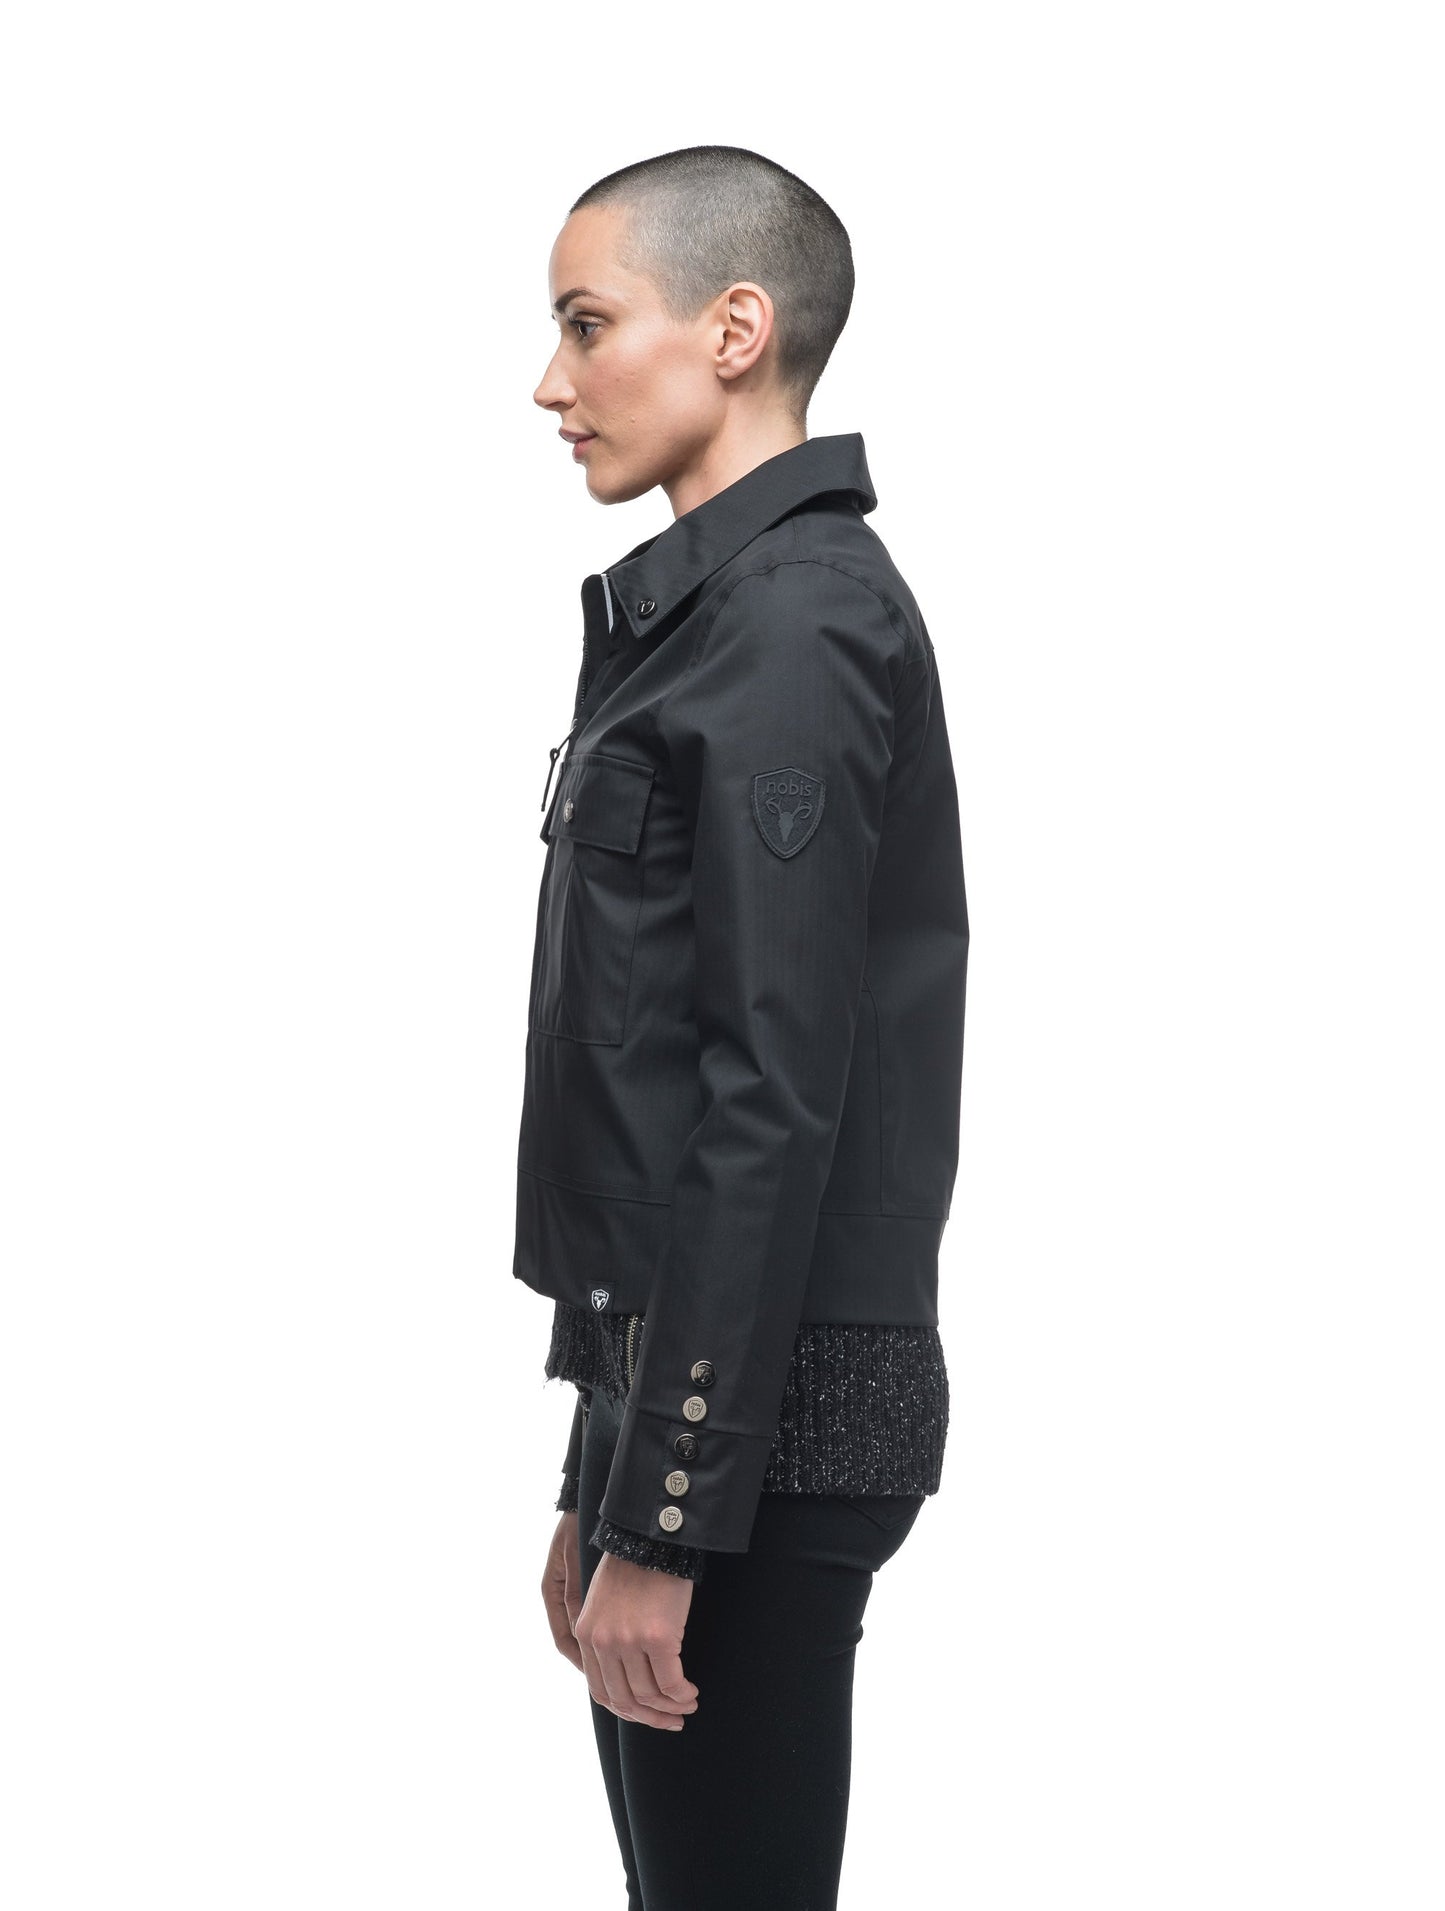 Women's cropped military inspired jacket with shirt collar detail in Black, Dusty Rose, or Camel